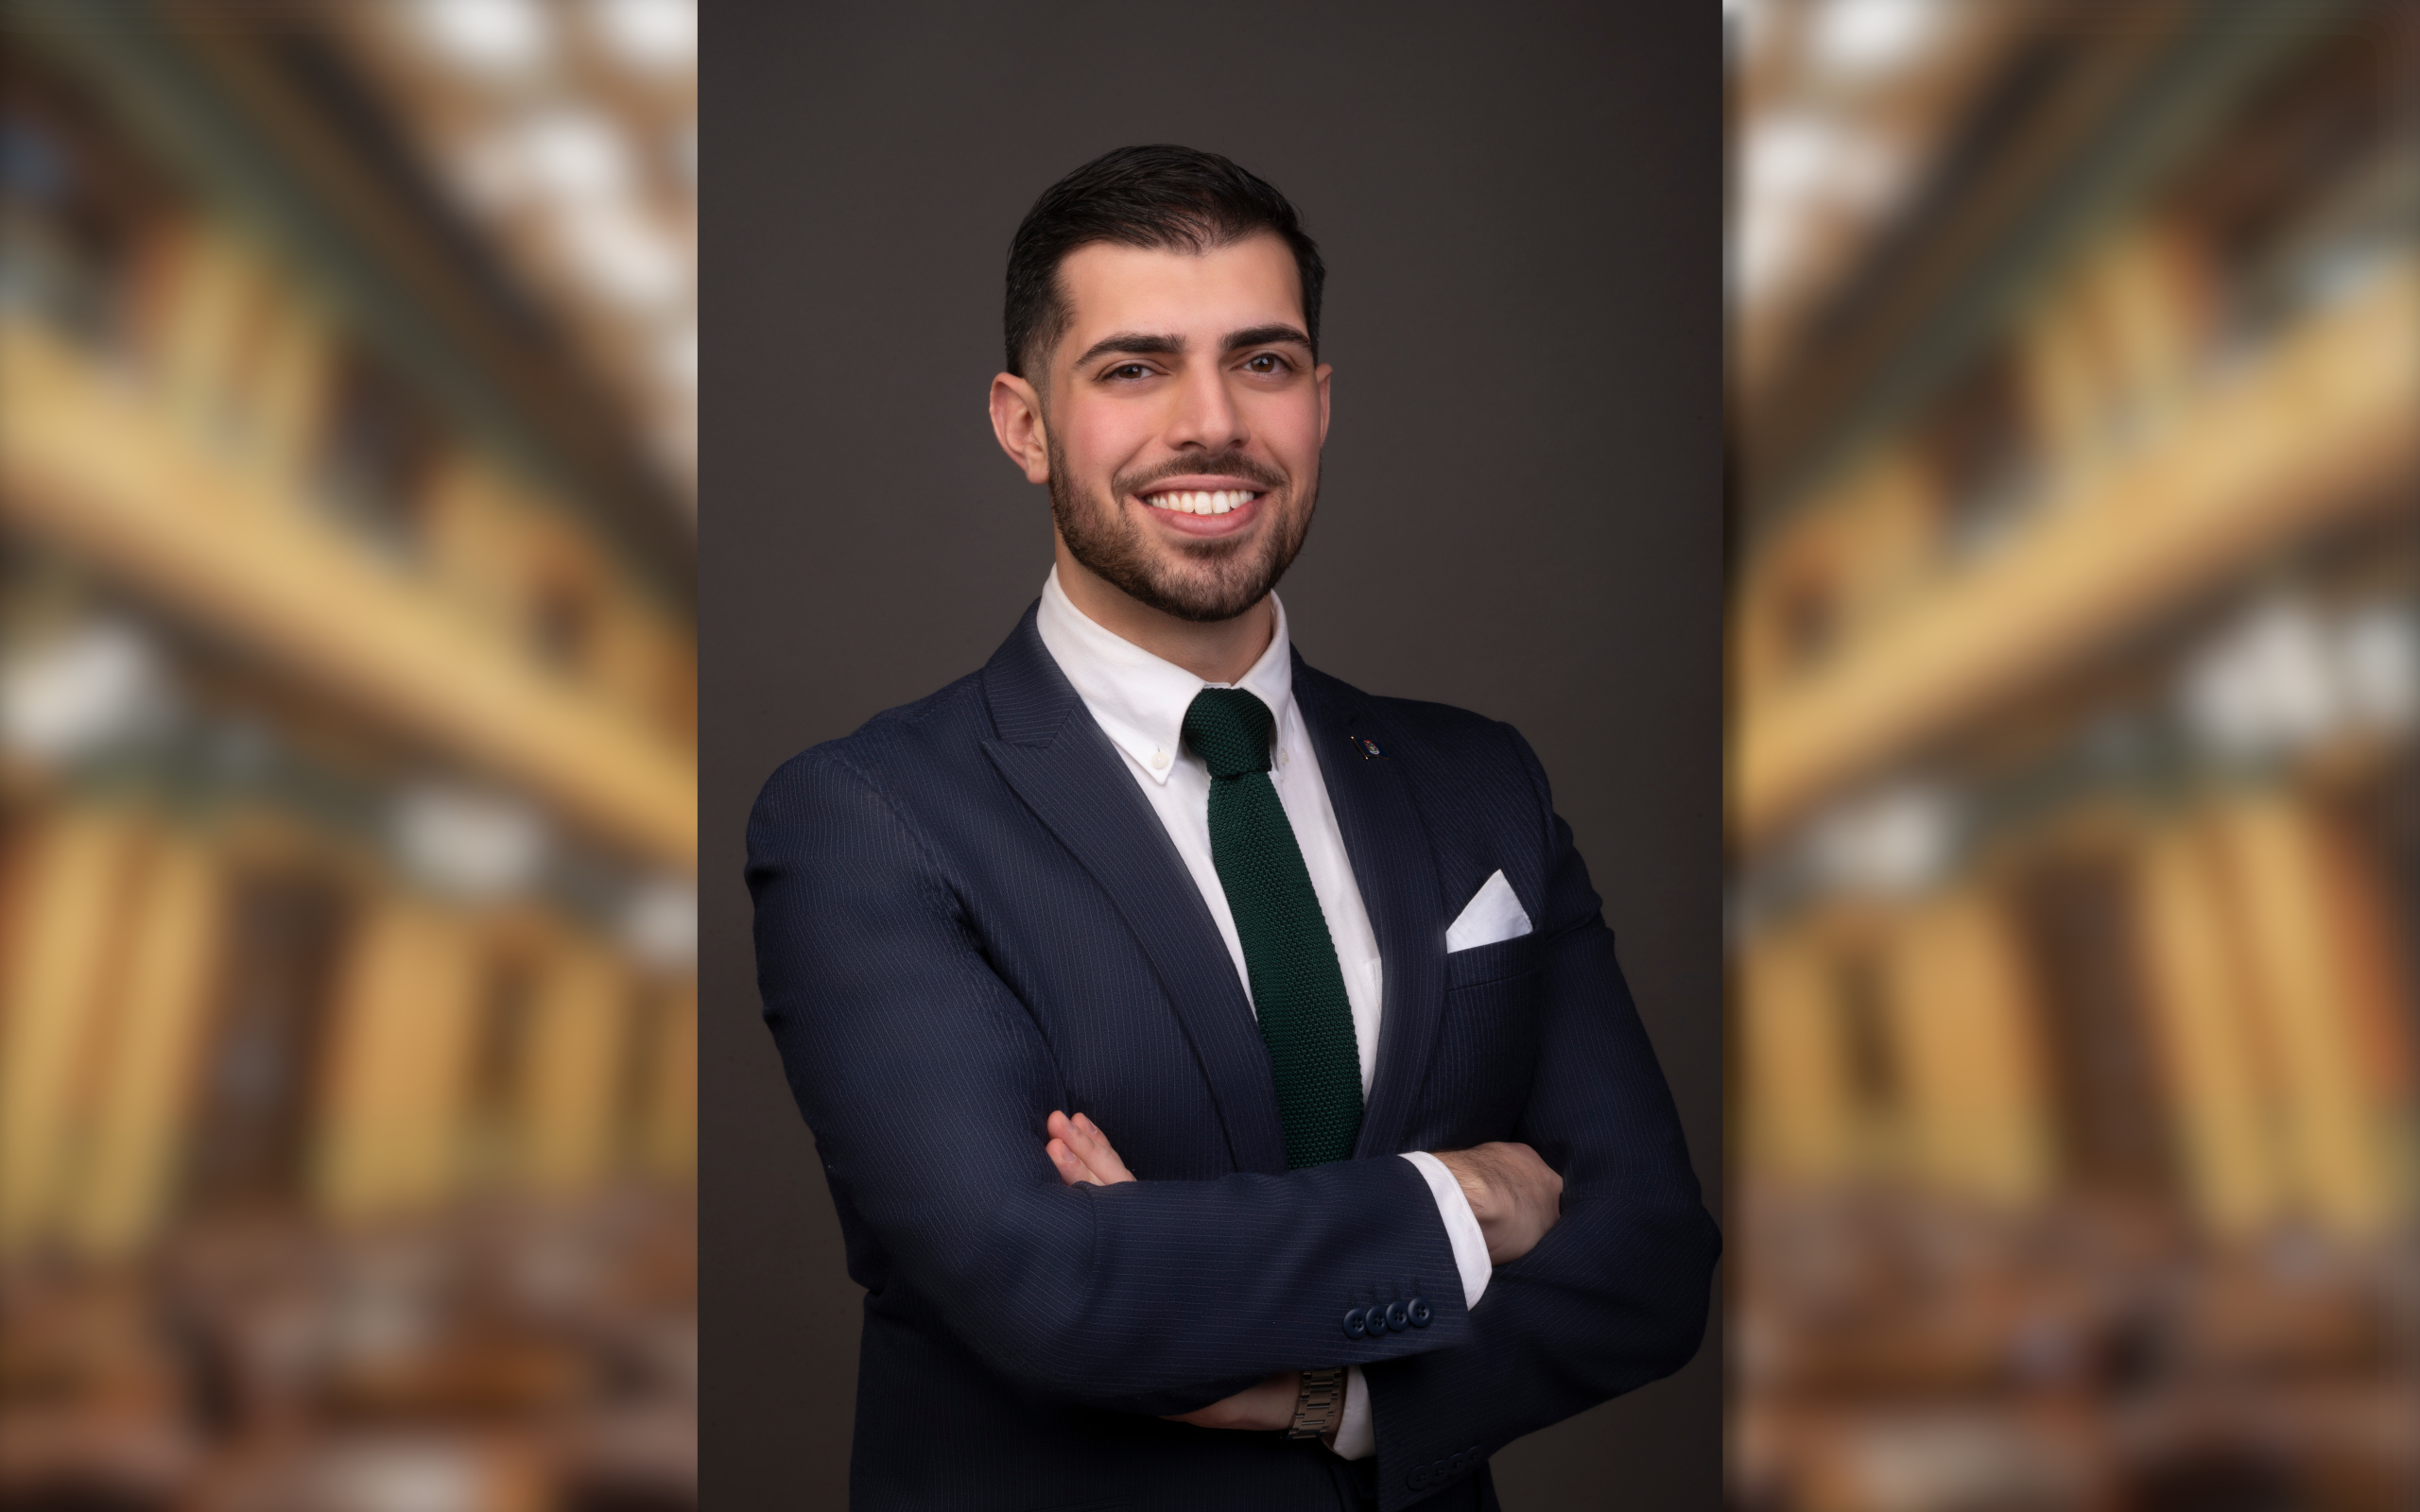 Bilal Hammoud, candidate for Sate House District 15